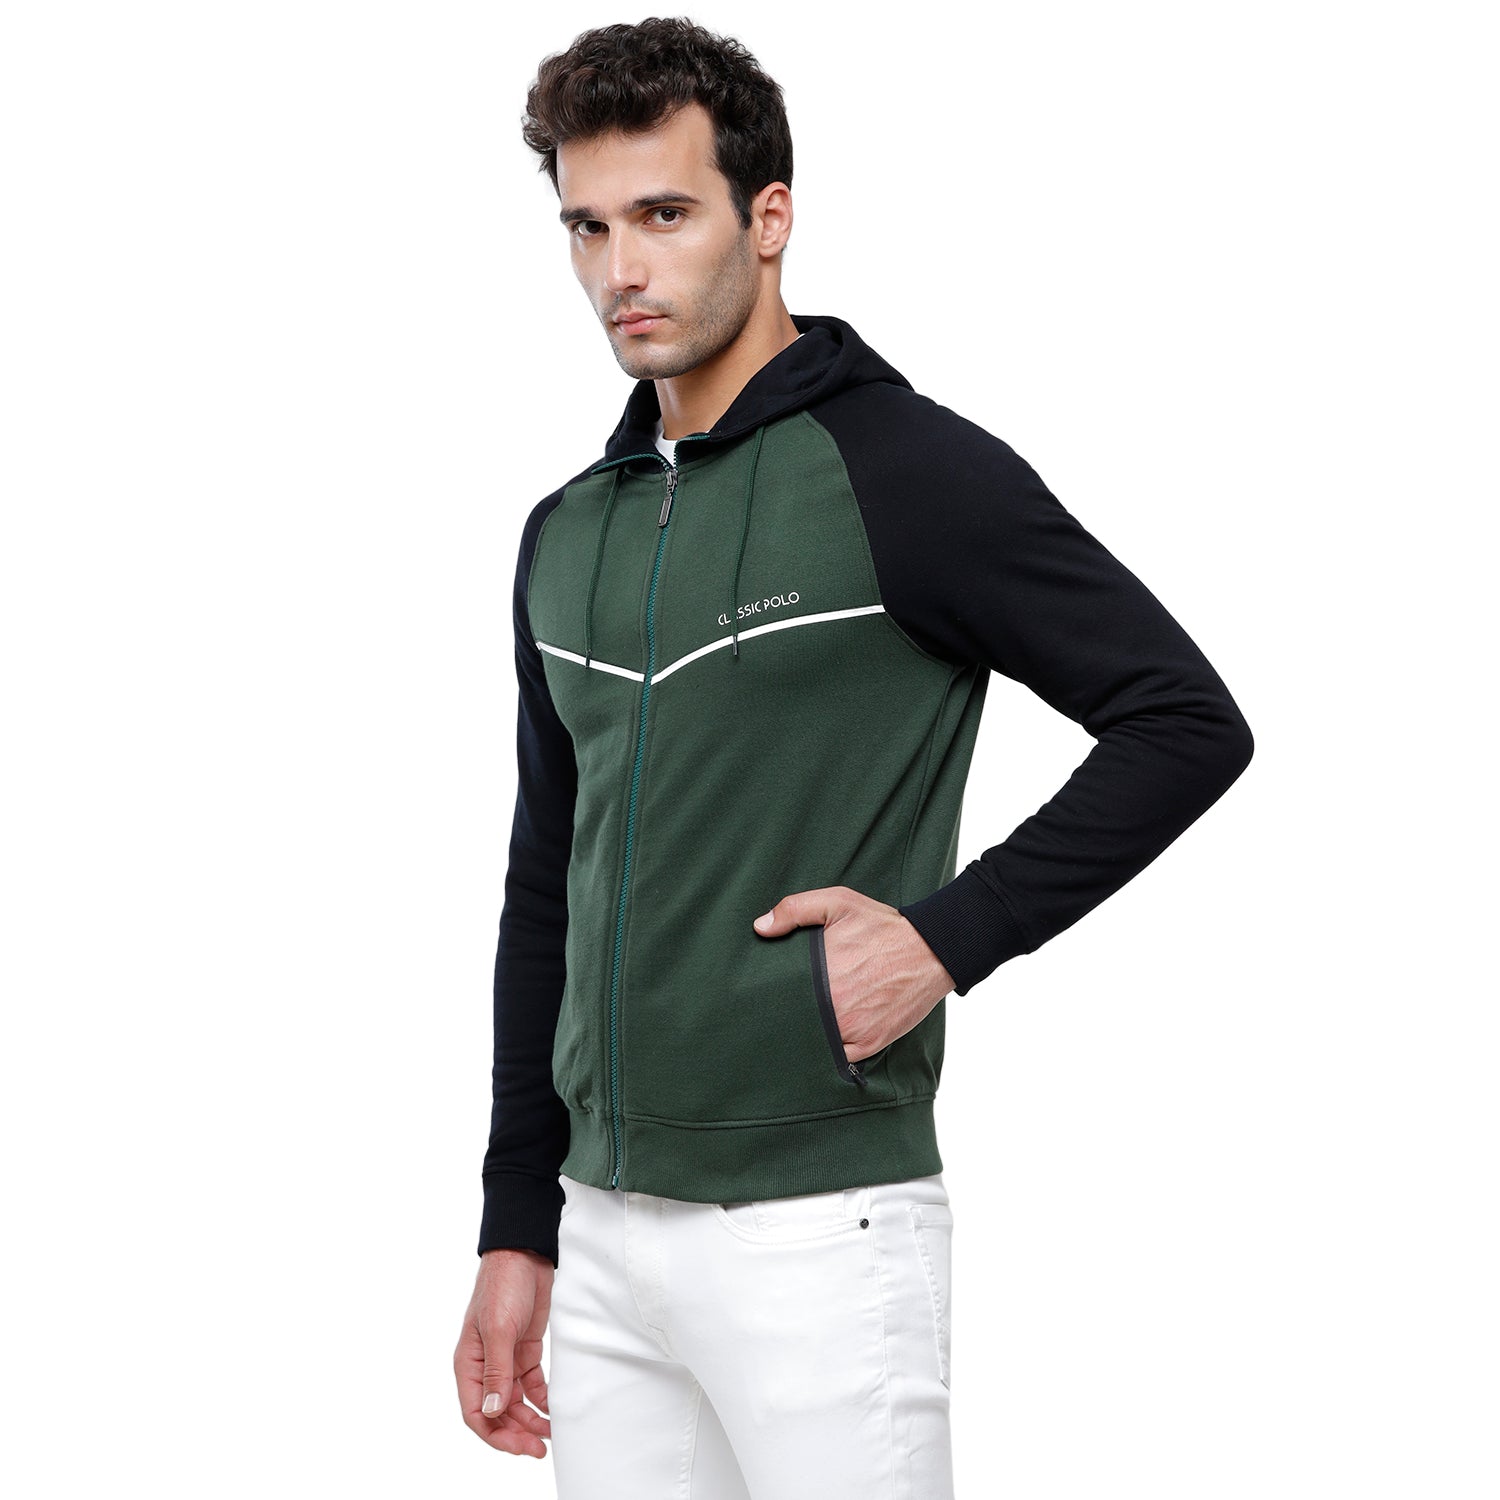 Classic Polo Men's Color Block Full Sleeve Green & Black Hooded Sweat Shirt - CPSS-325A Sweat Shirts Classic Polo 